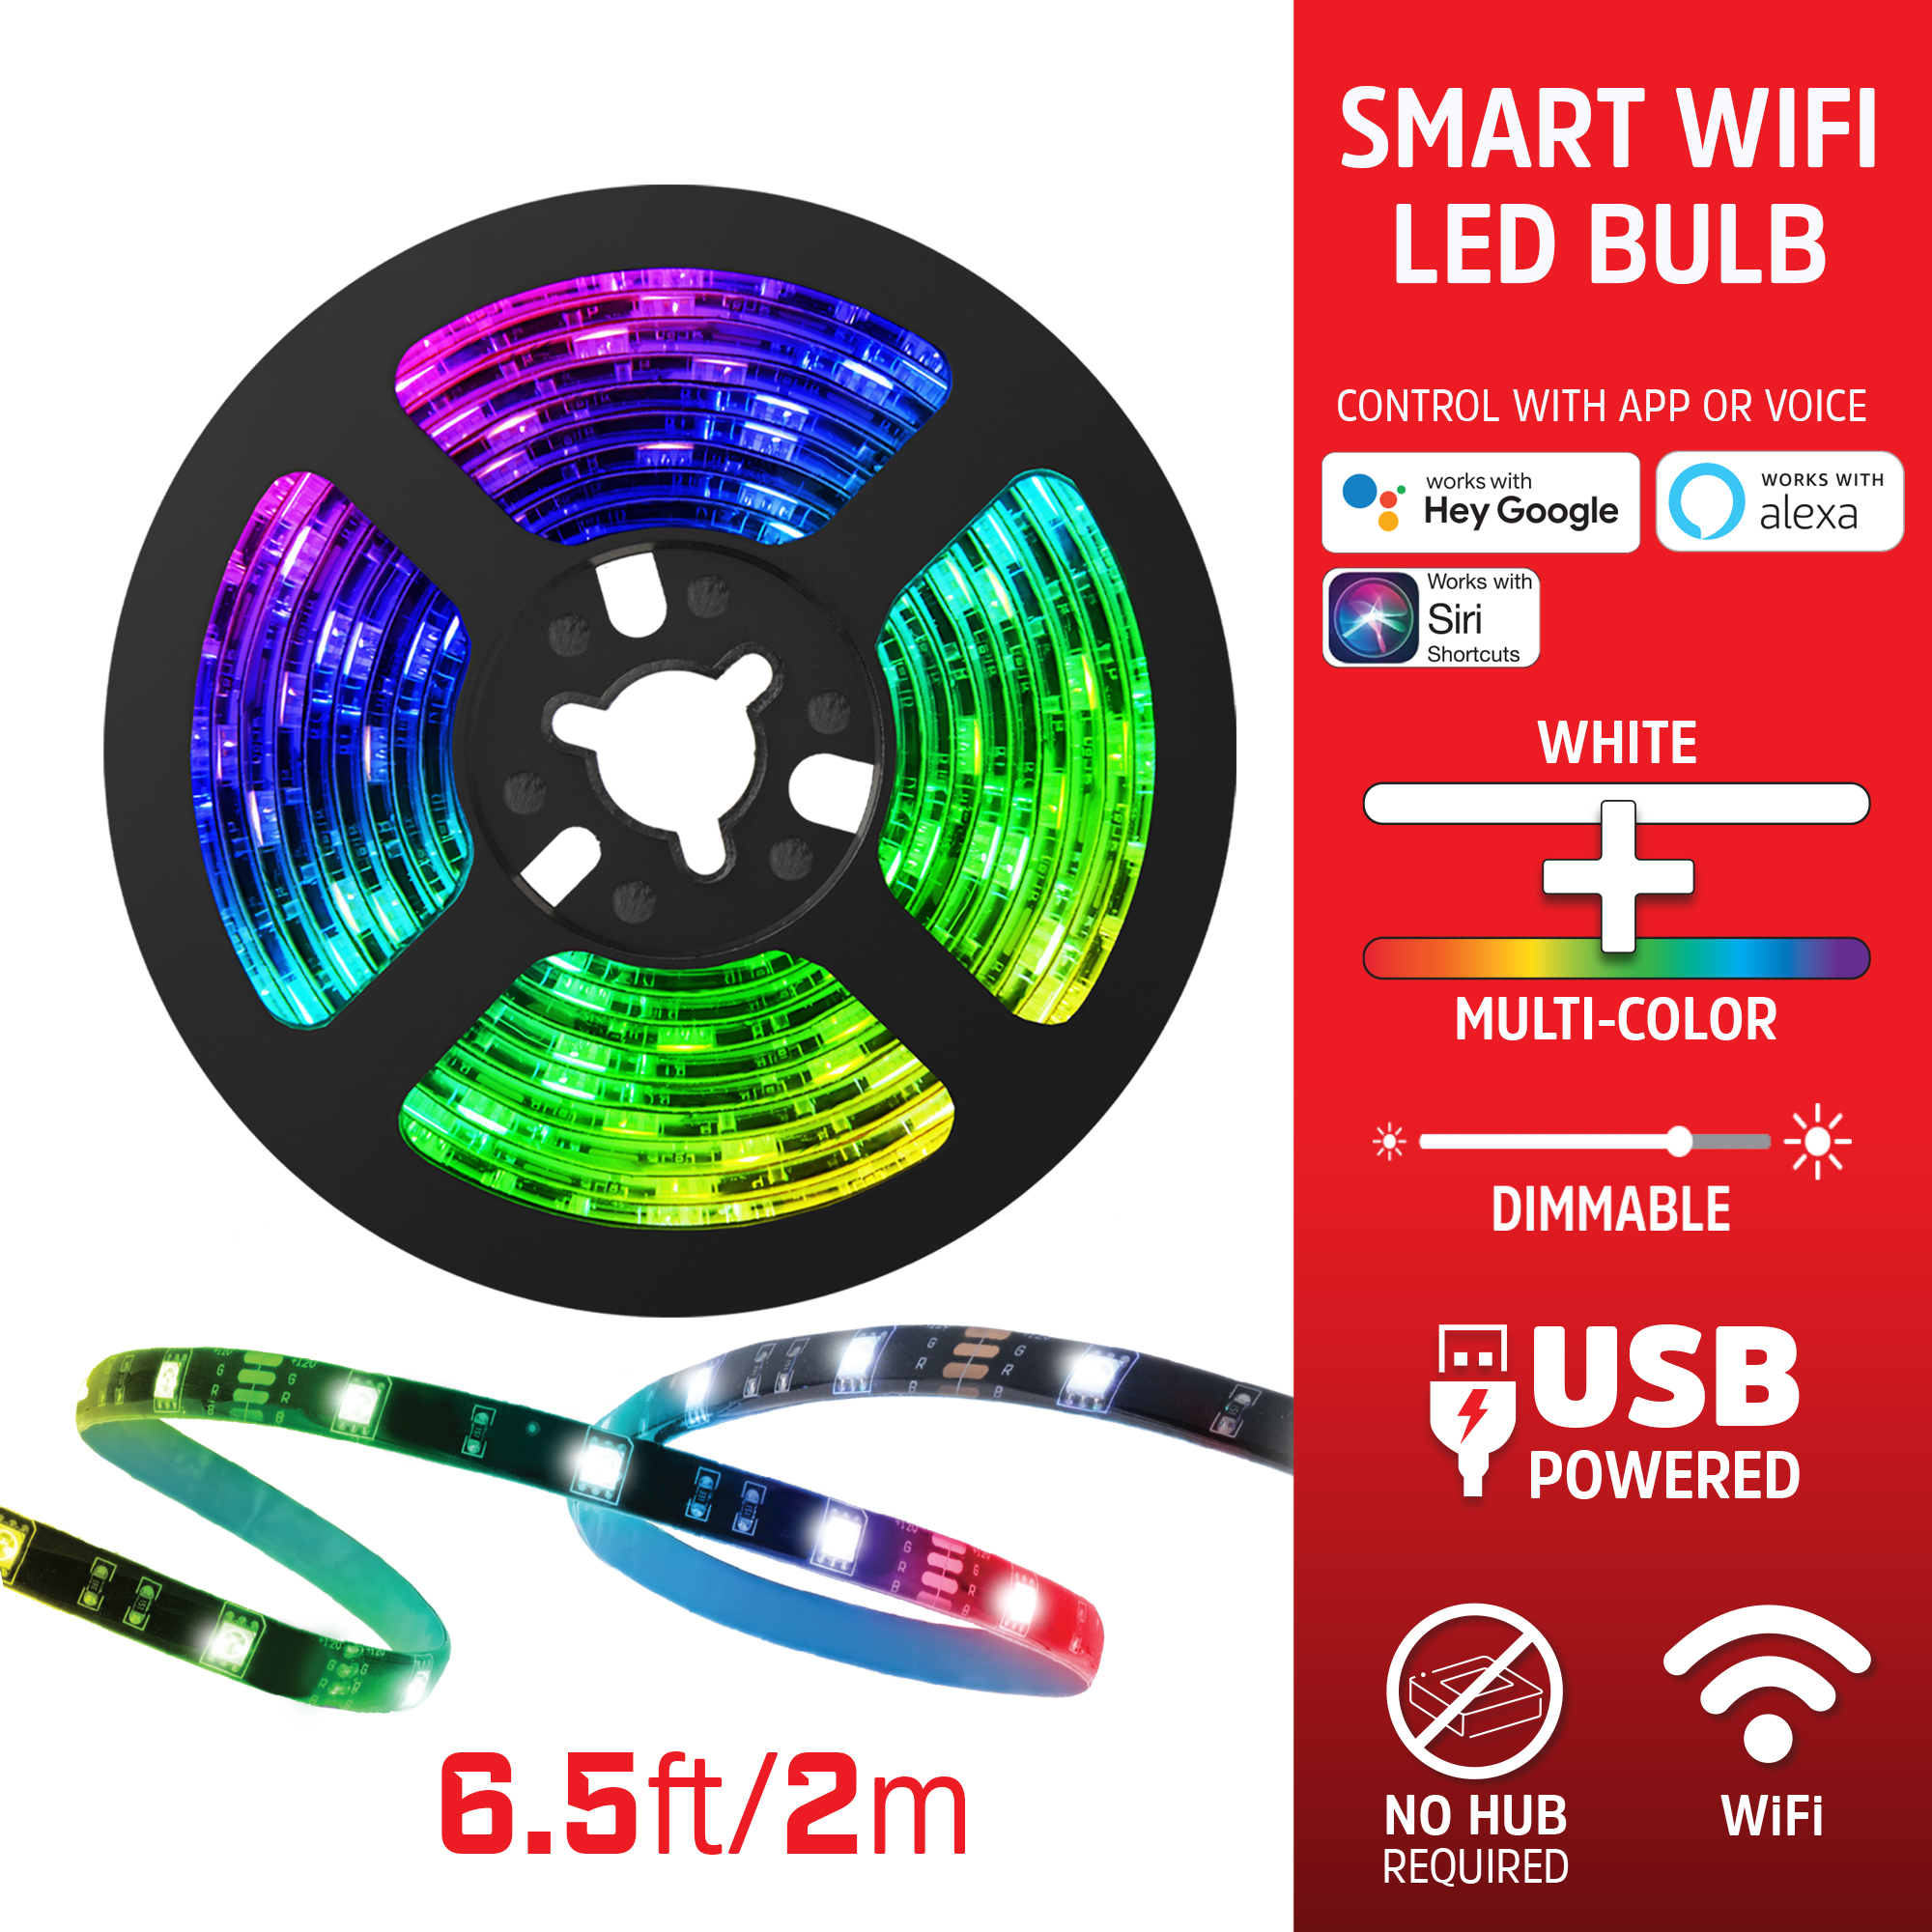 Energizer Connect Eos2-1002-rgb 16.5-Ft. Smart Wi-Fi Indoor/Outdoor White/Multicolor LED Light Strip